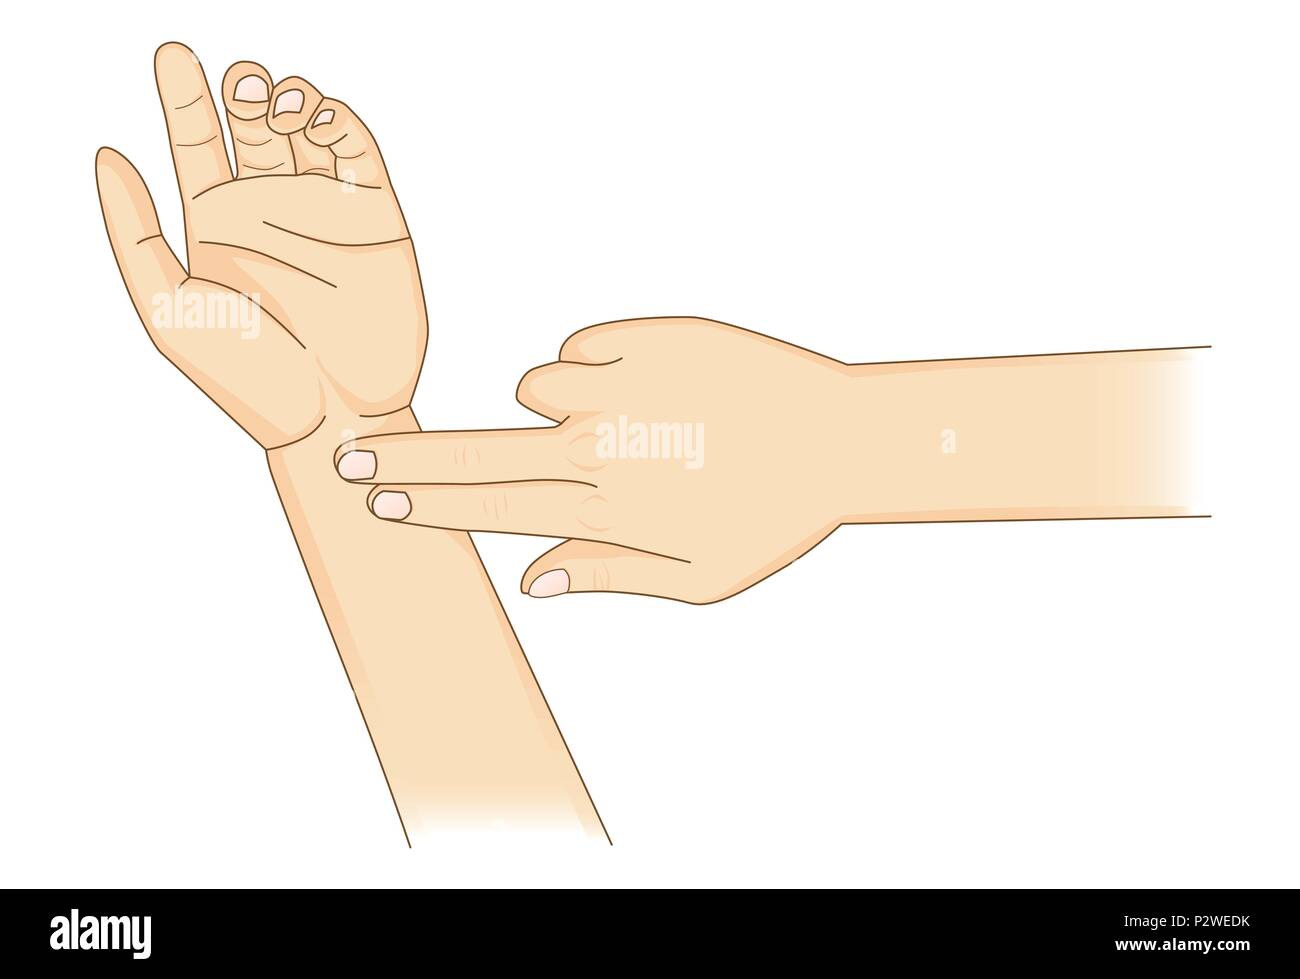 Checking Your Heart Rate Manually with place two fingers at wrist. Stock Vector